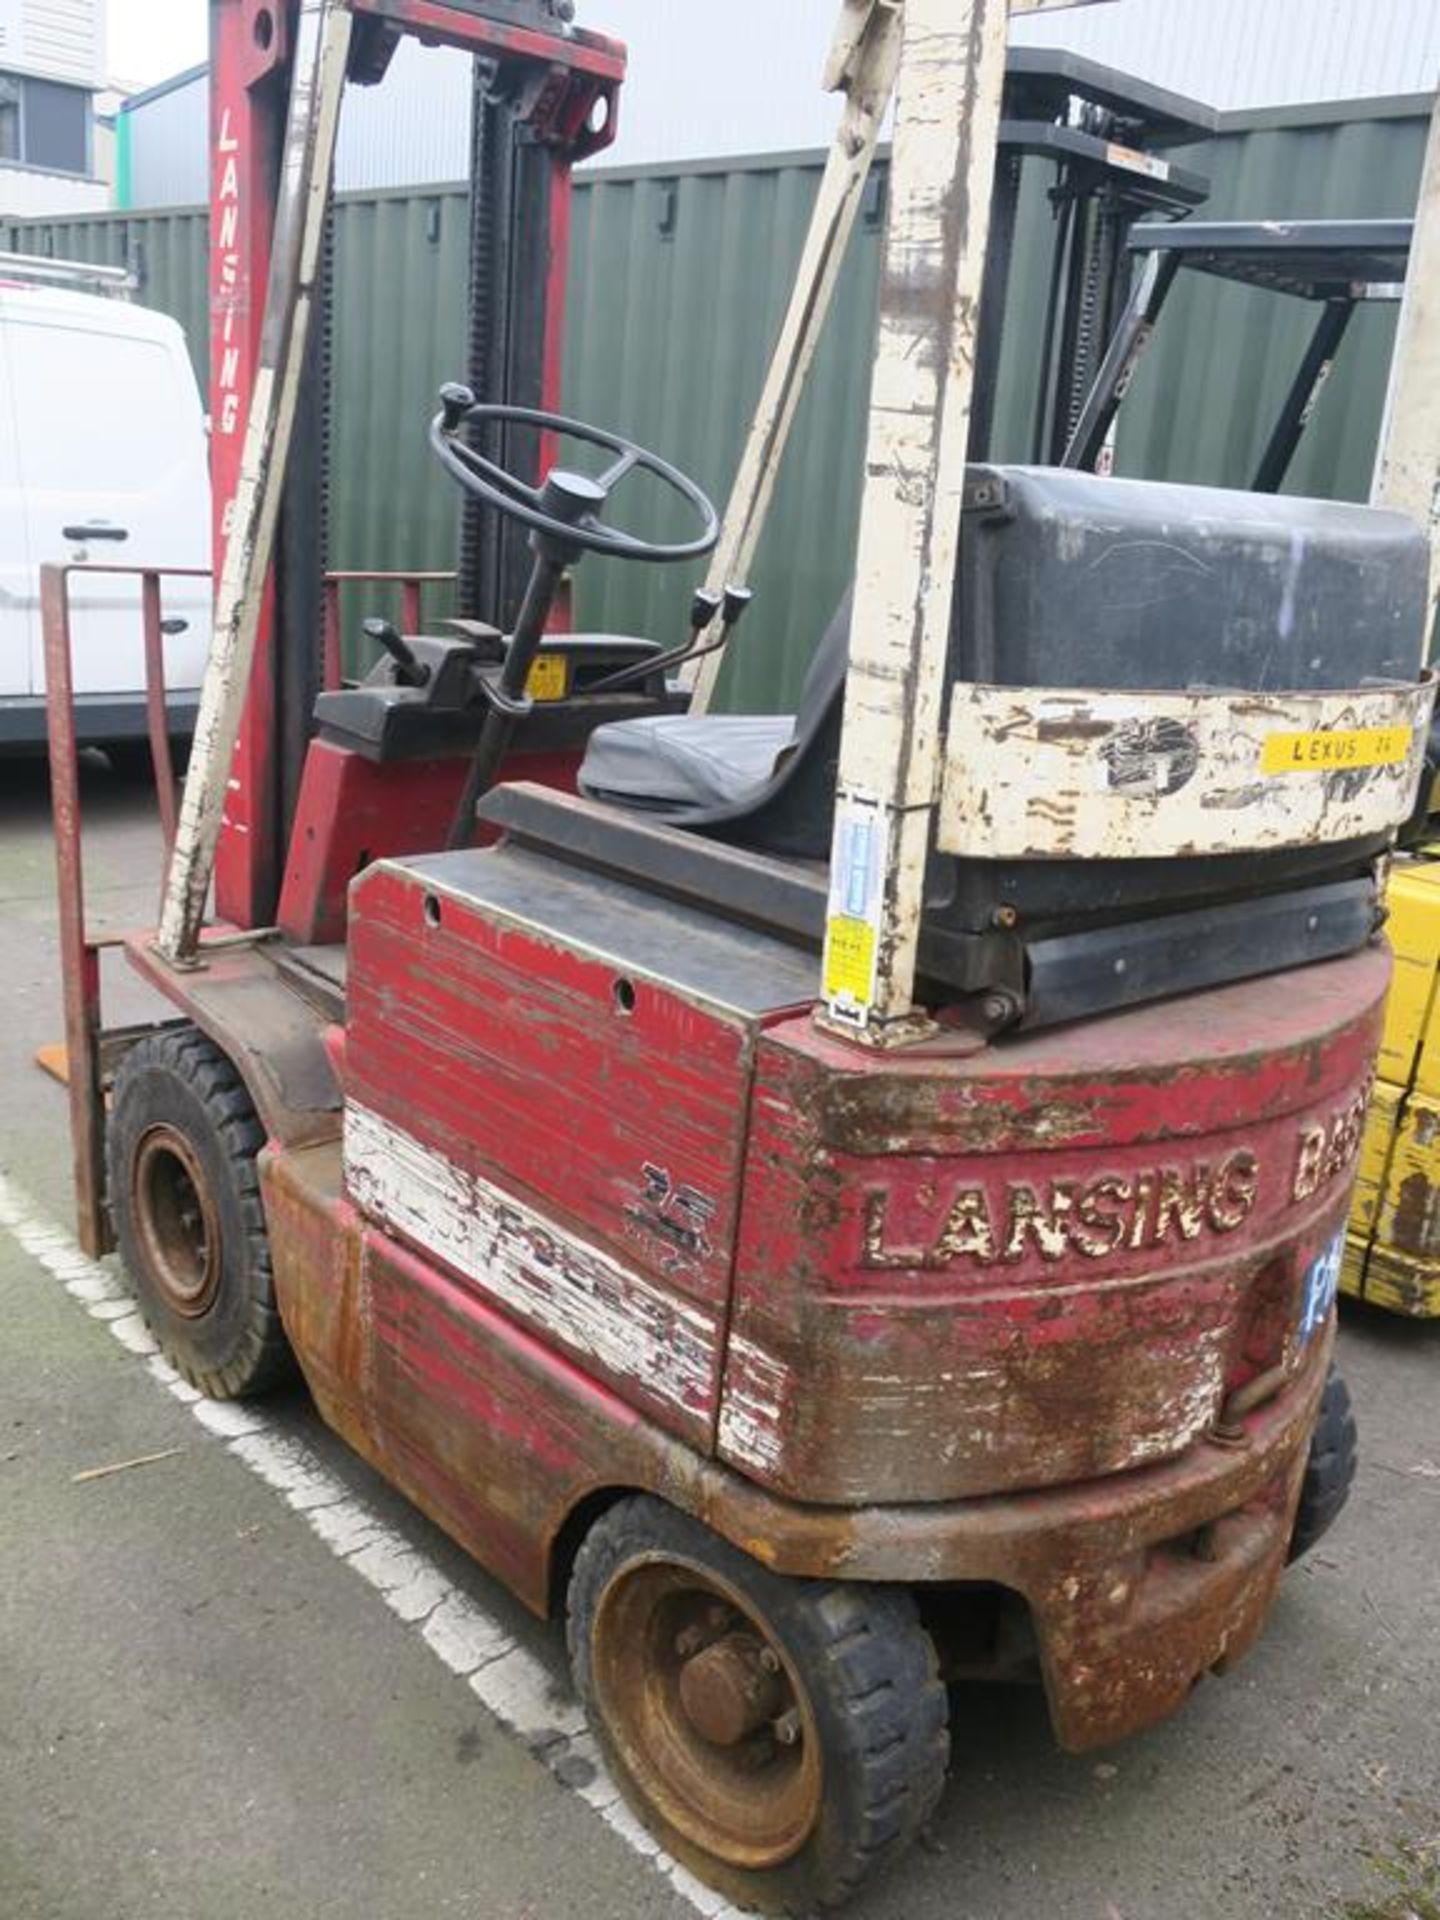 * Lansing Bagnall Electric Forklift with duplex mast, Spiegel automatic charger. Please note Buyer - Image 6 of 9